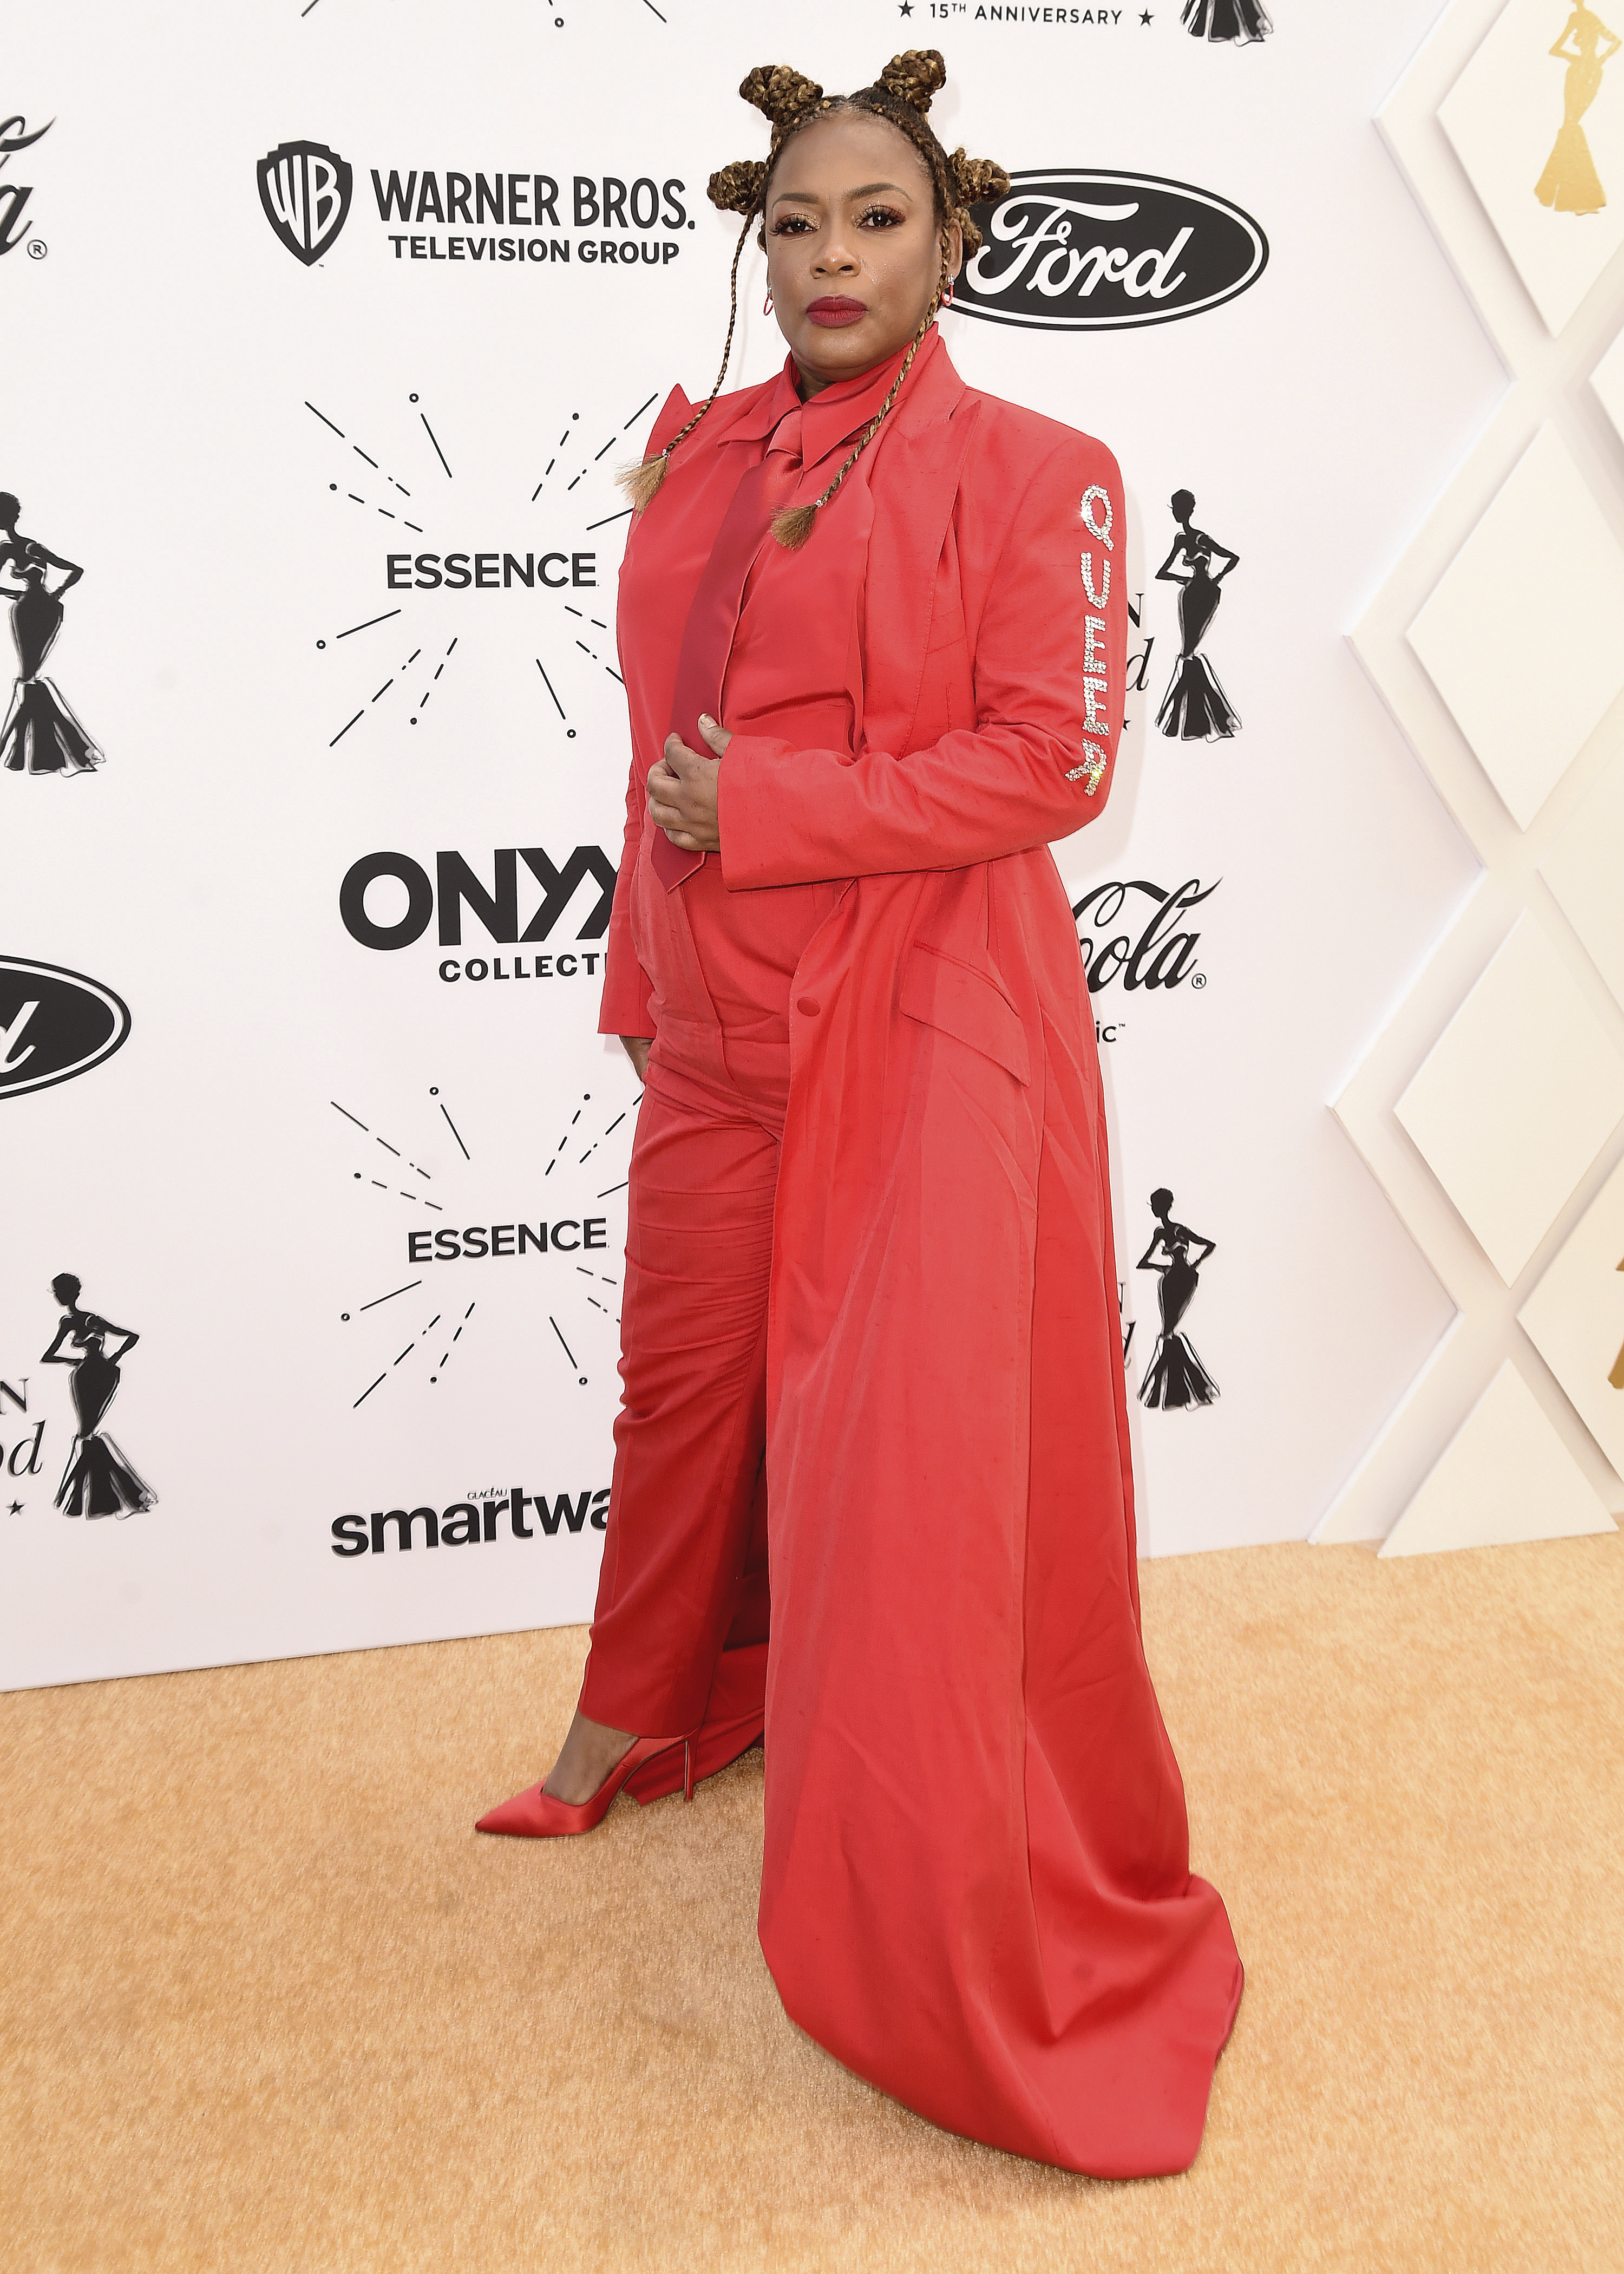 Aunjanue Ellis-Taylor in a pantsuit with a cape at an event, posing for the camera